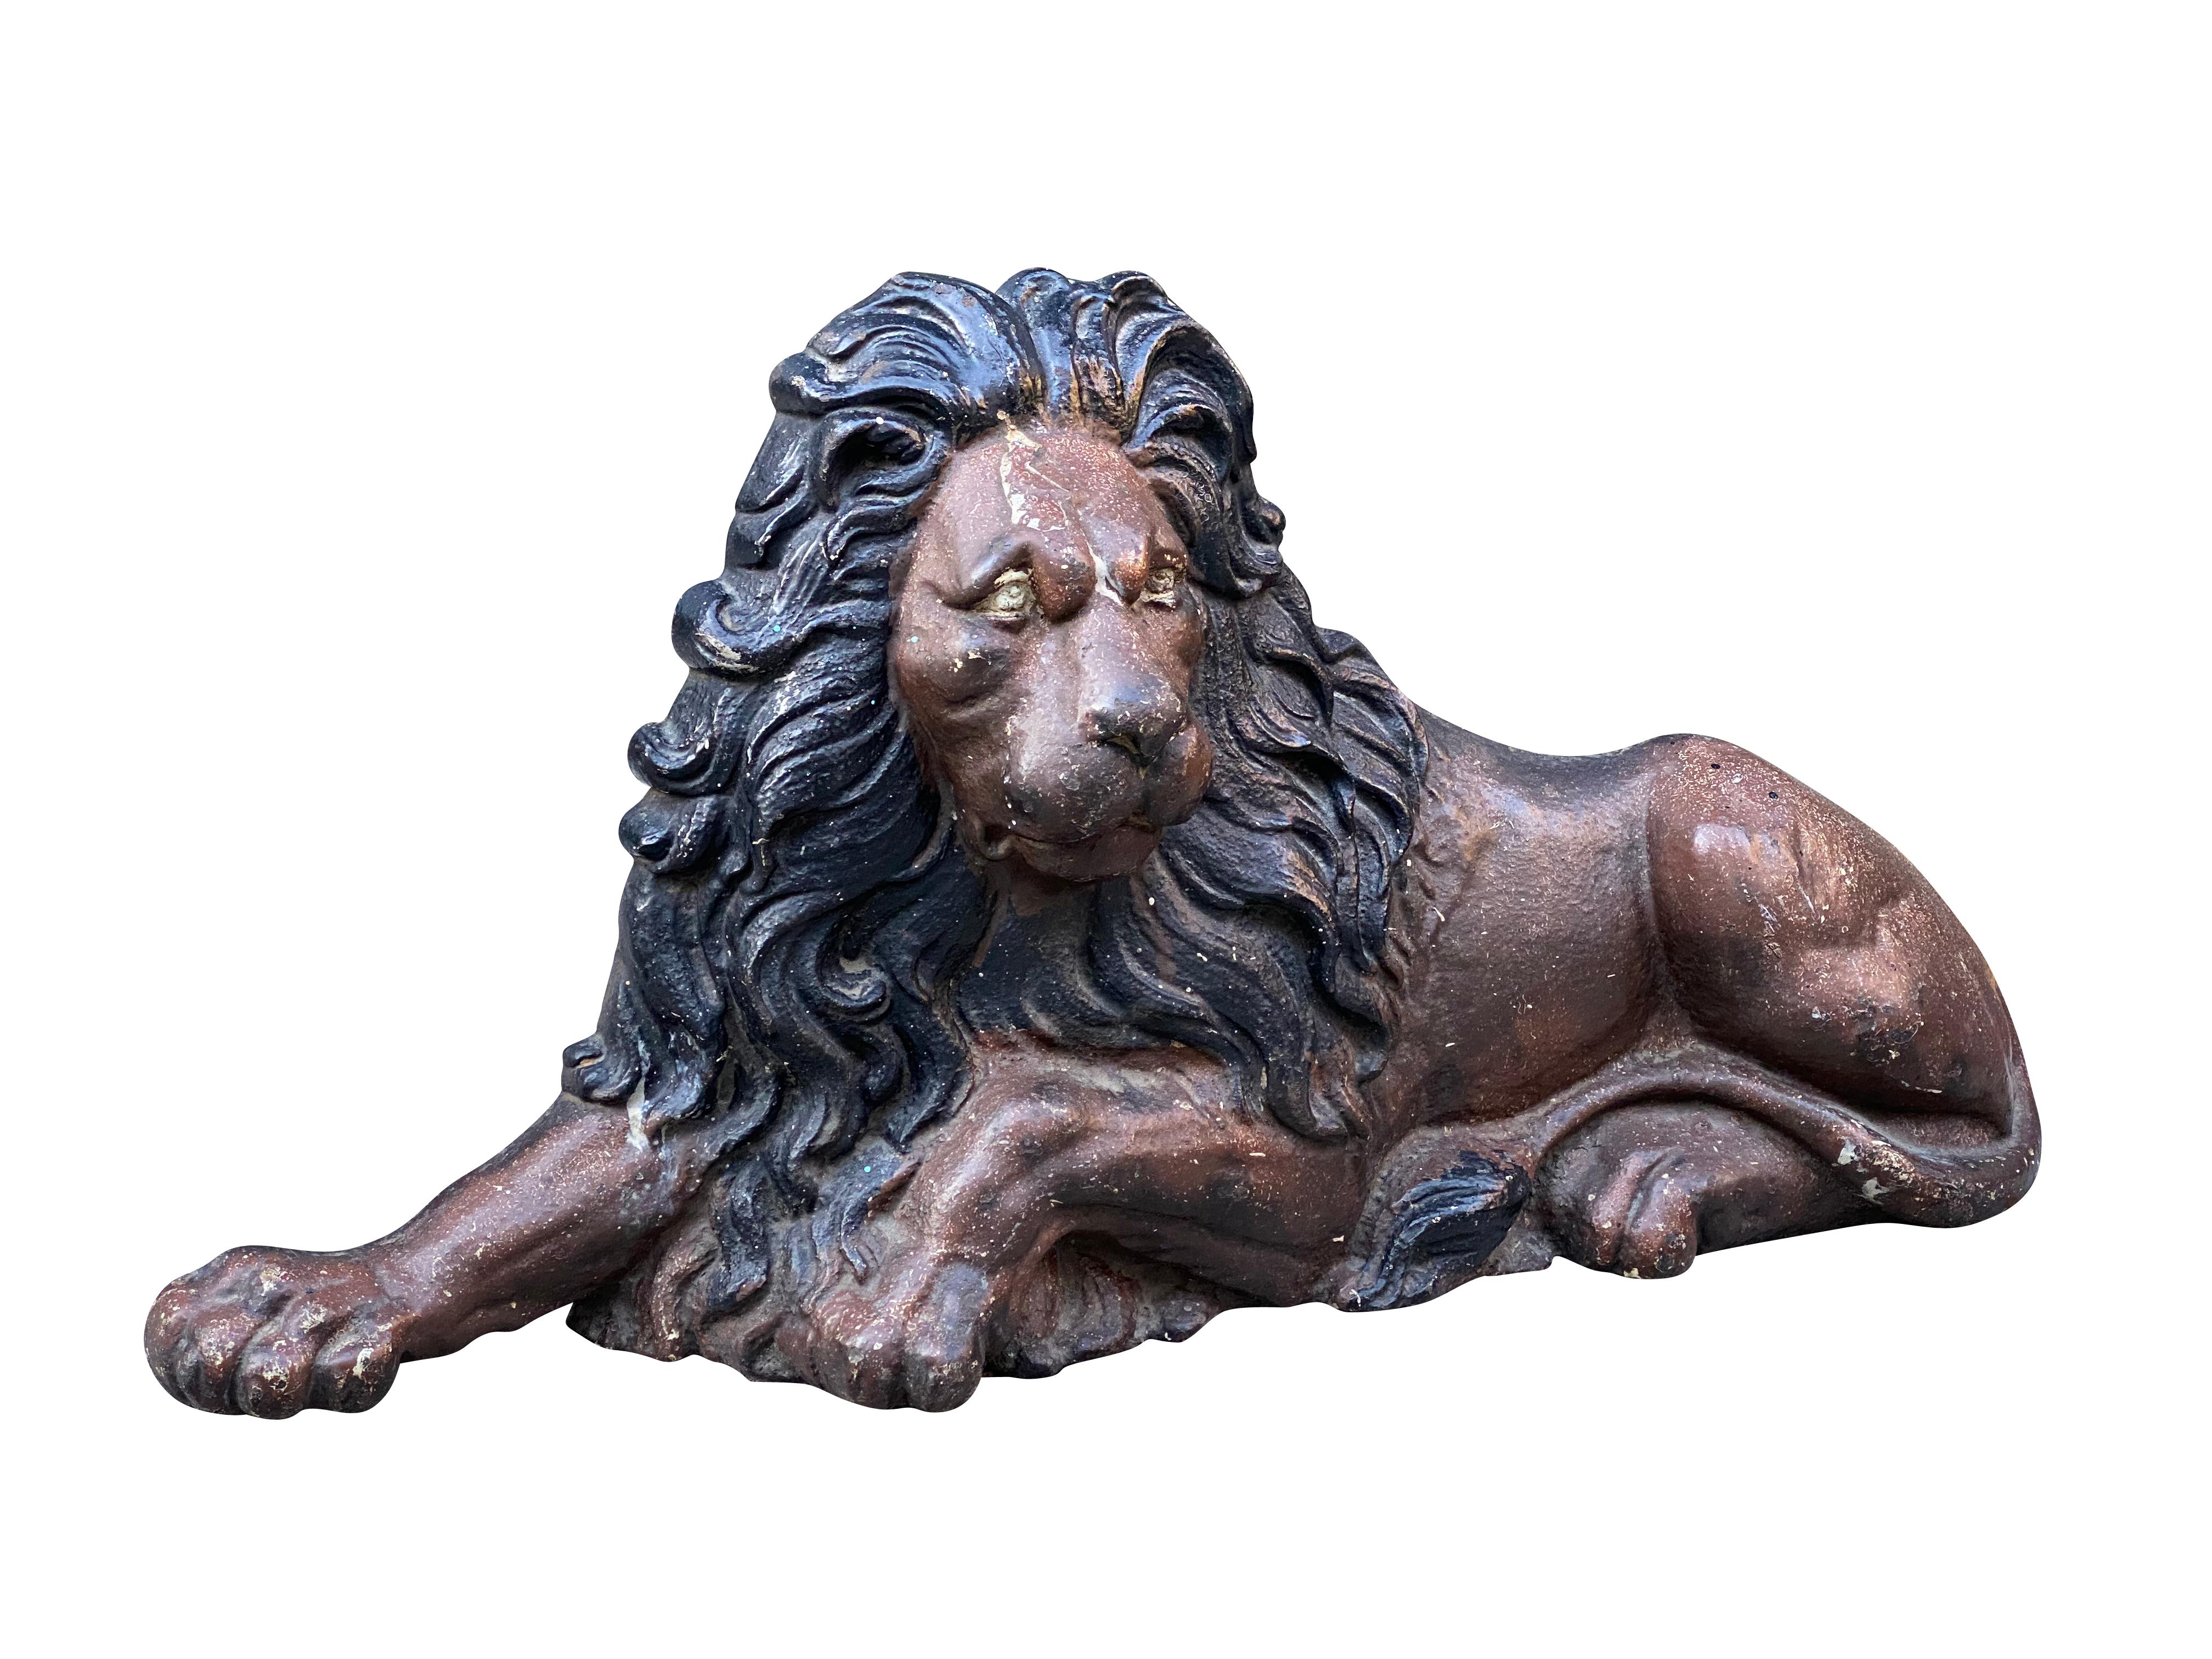 Seated painted brown with black mane. Possibly made as a doorstop.